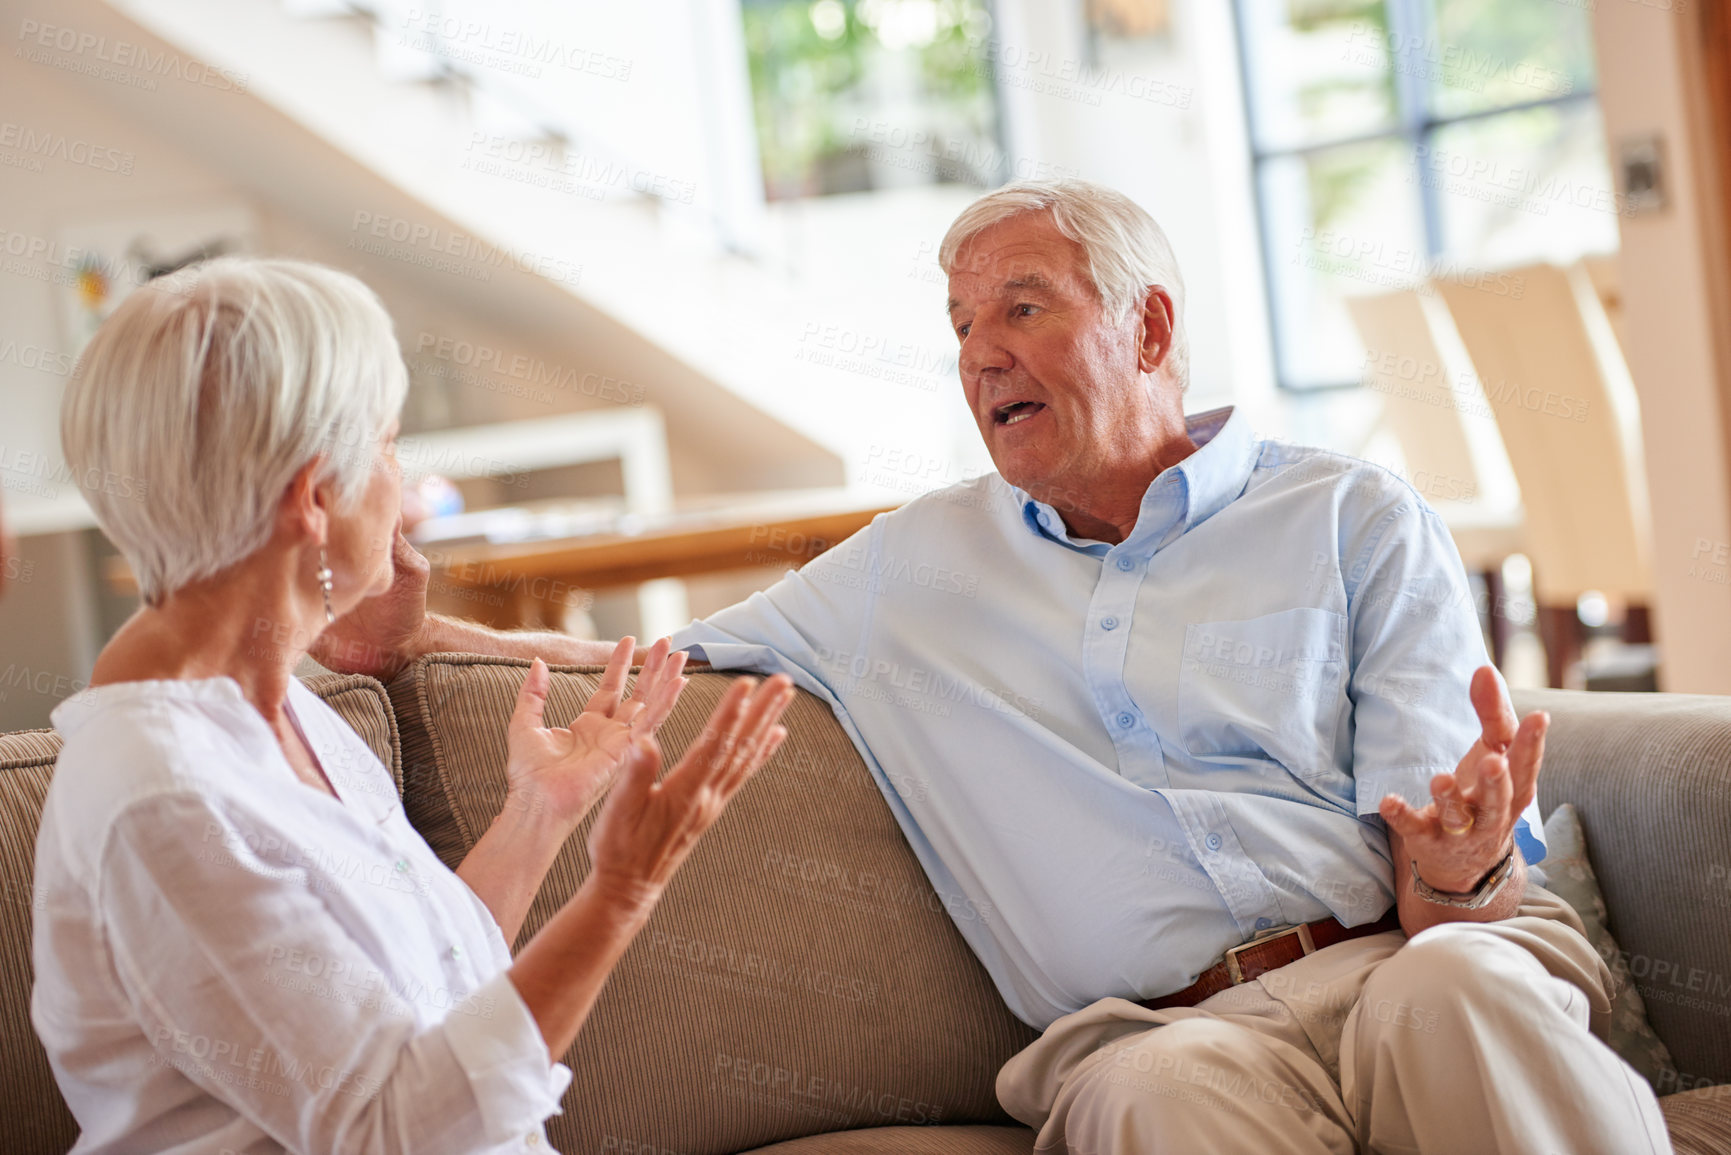 Buy stock photo Shot of a senior couple having an argument at home